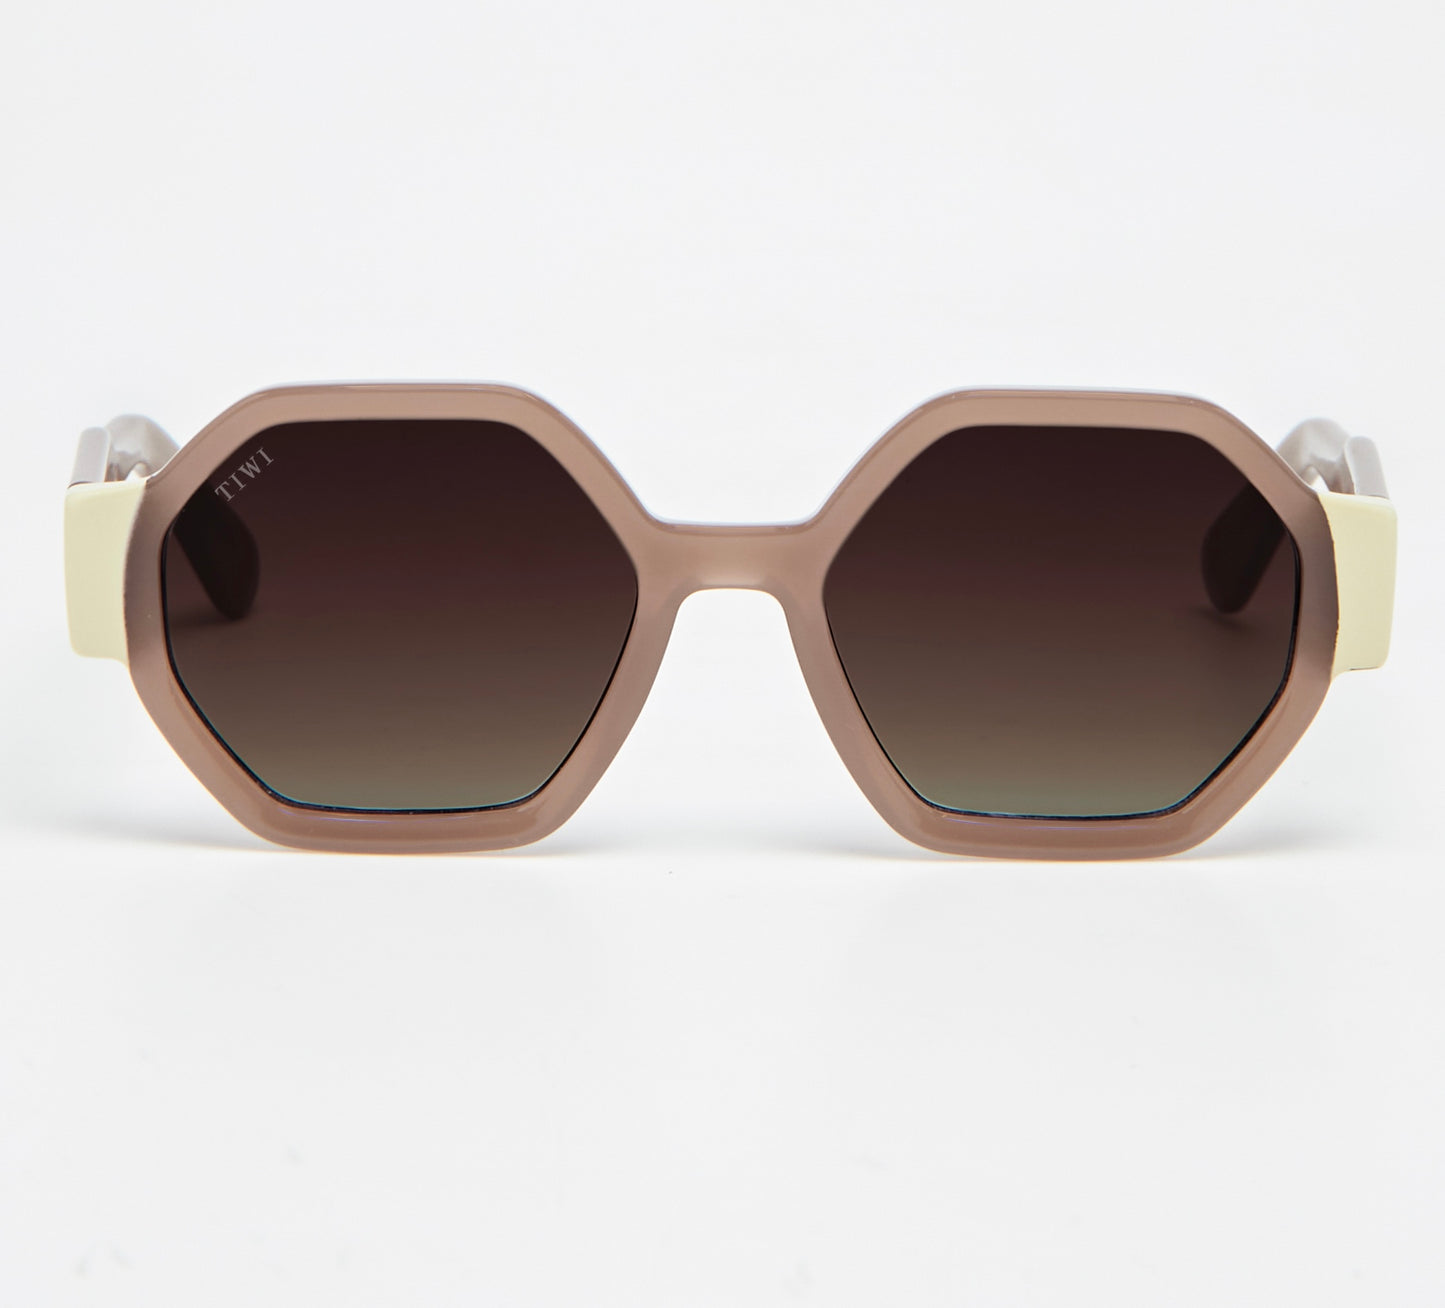 VALETTE  Available in more colors Shiny Coconut/Beige with Brown Gradient Lenses  